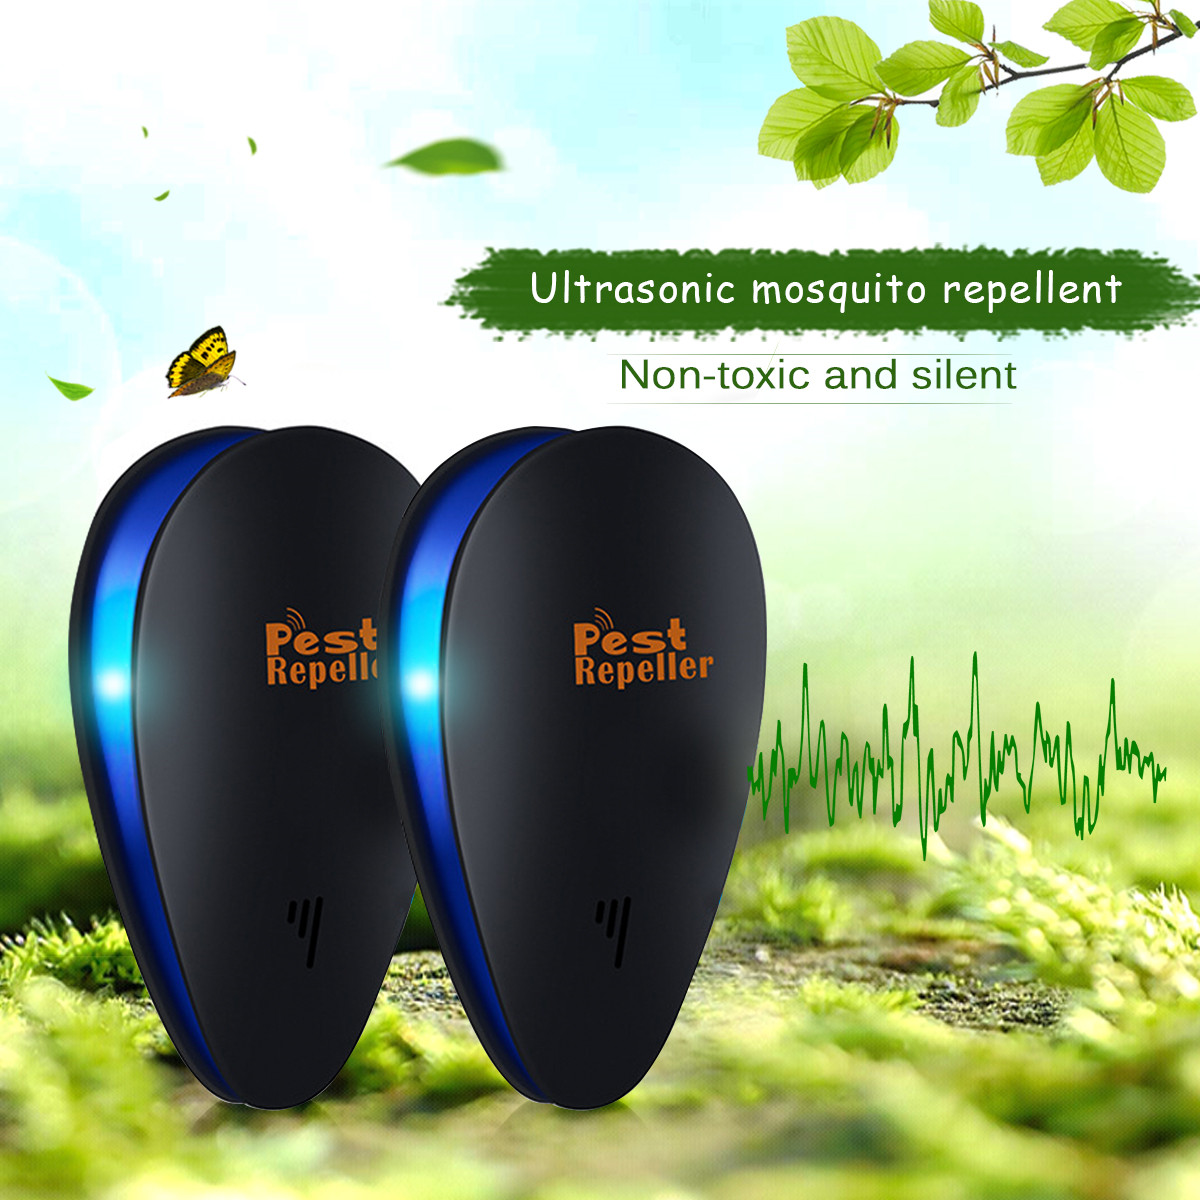 GARPROVM-4Pcs-Ultrasonic-Insect-Repellent-Electronic-Mosquito-Mice-Fly-Contro-Outdoor-Camping-Garden-1855847-1